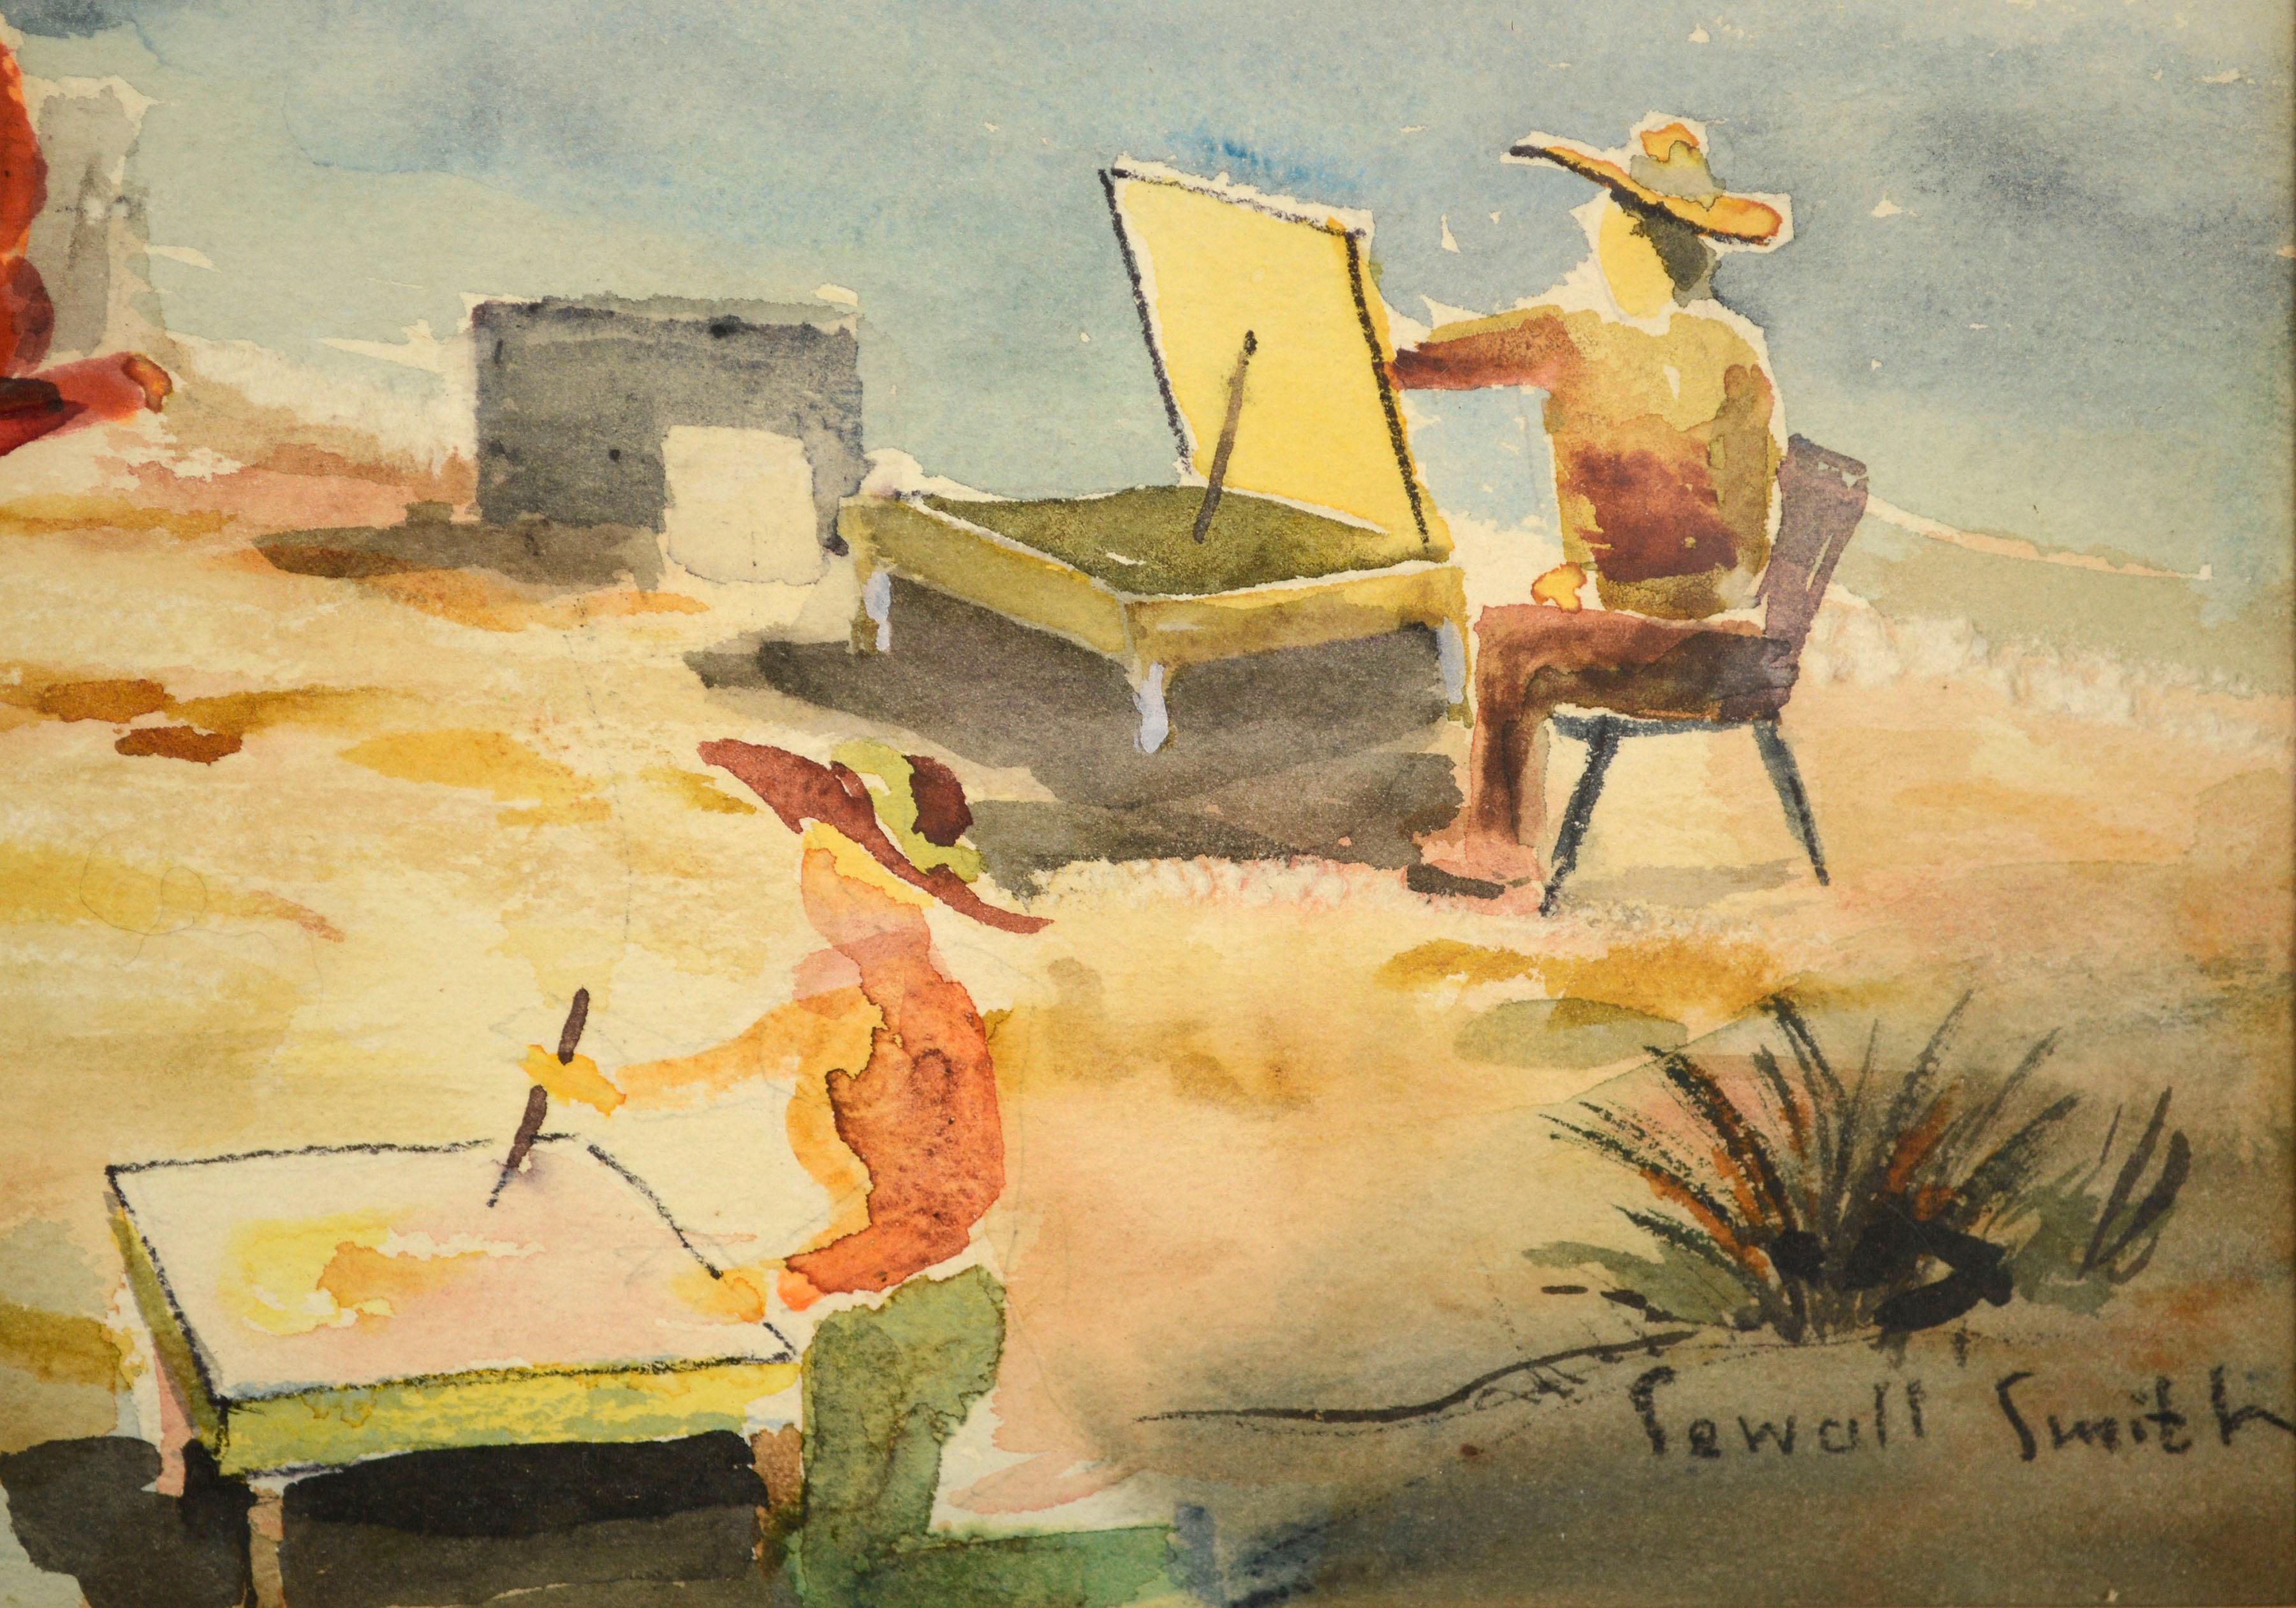 Art Class on the Beach, Vintage Bay Area Coast Figural Landscape Watercolor  - Brown Landscape Art by Sewall Smith